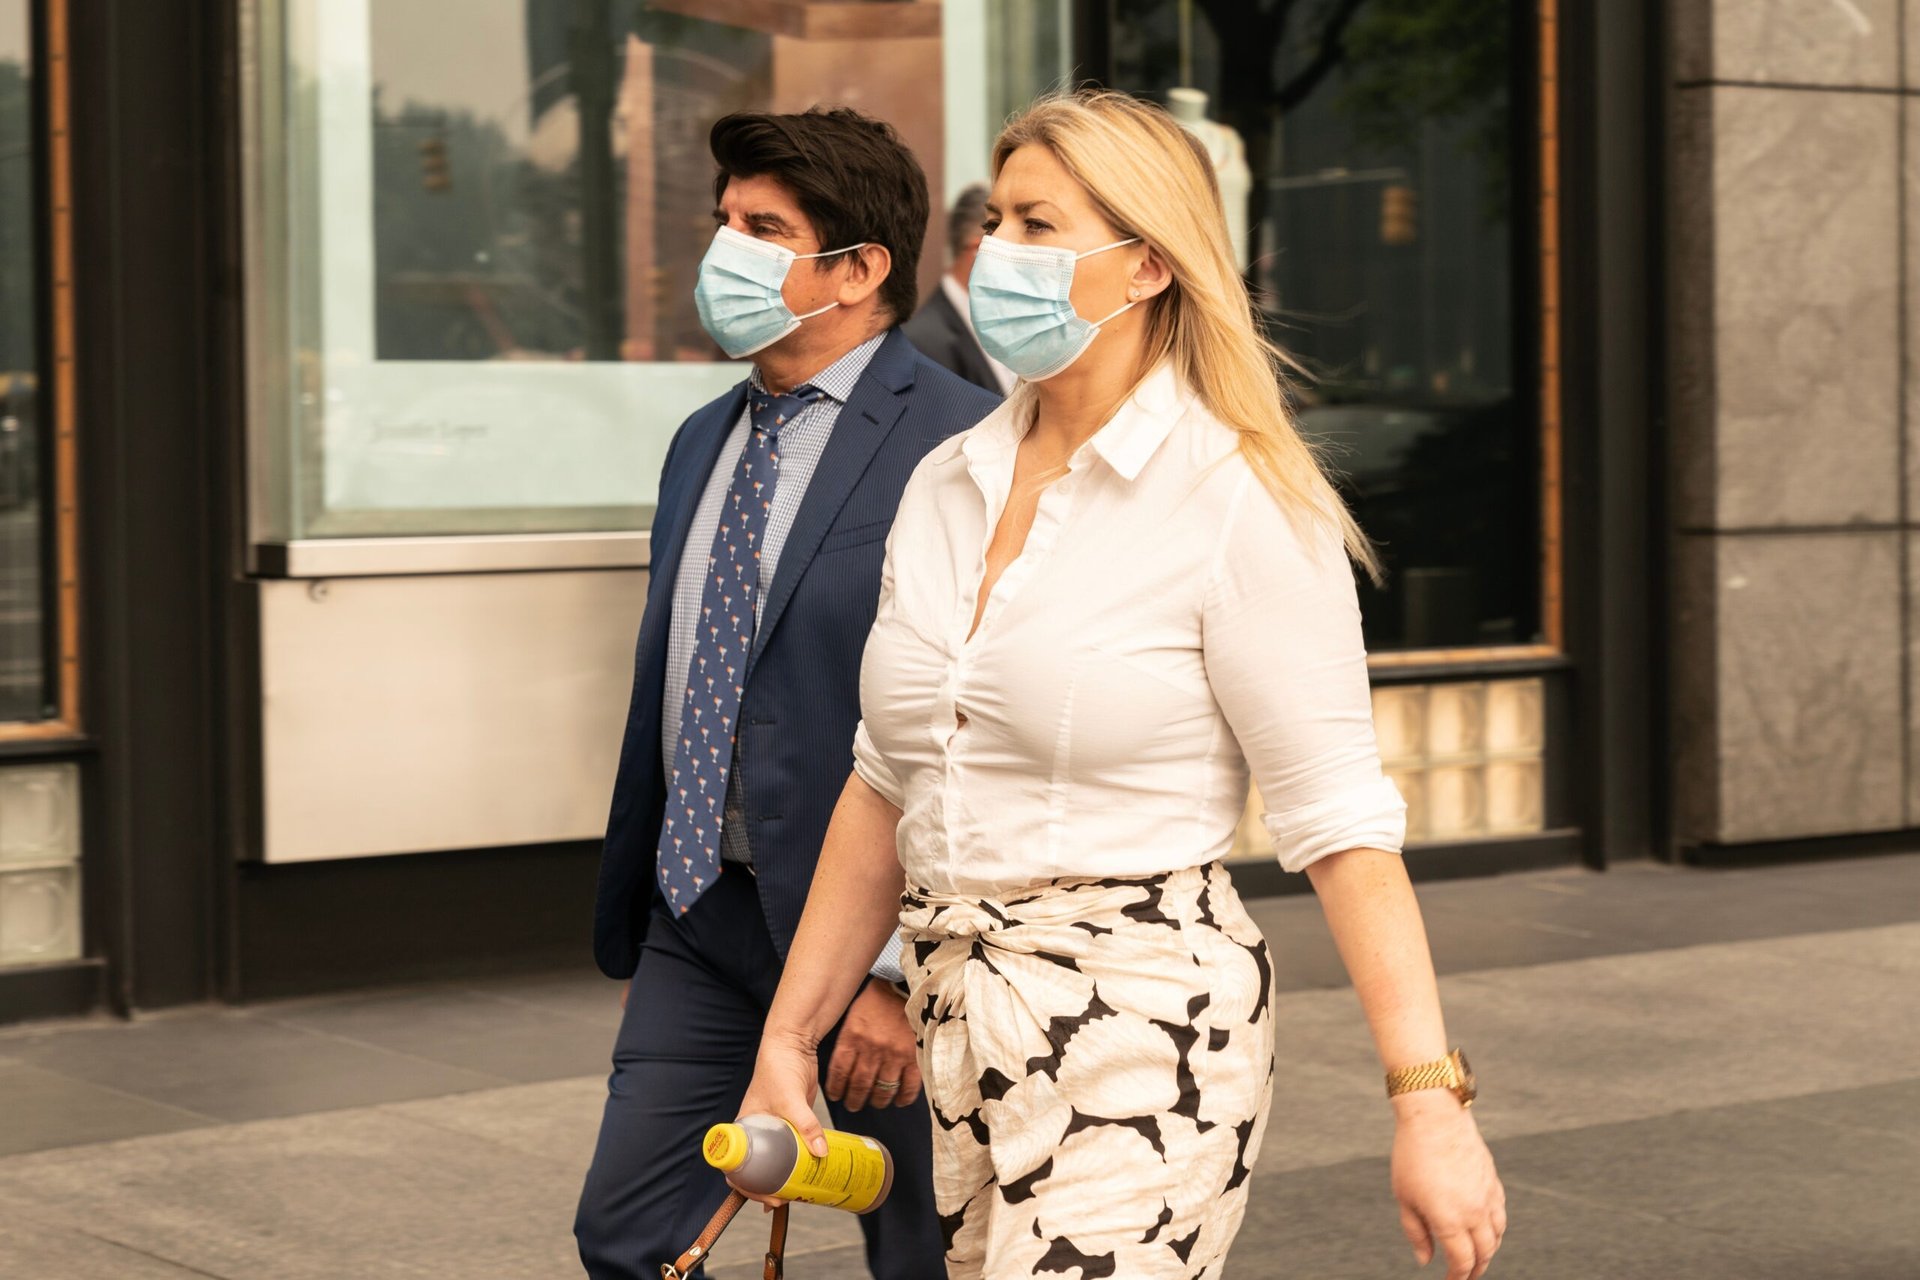 Two people wearing masks because of poor air quality.